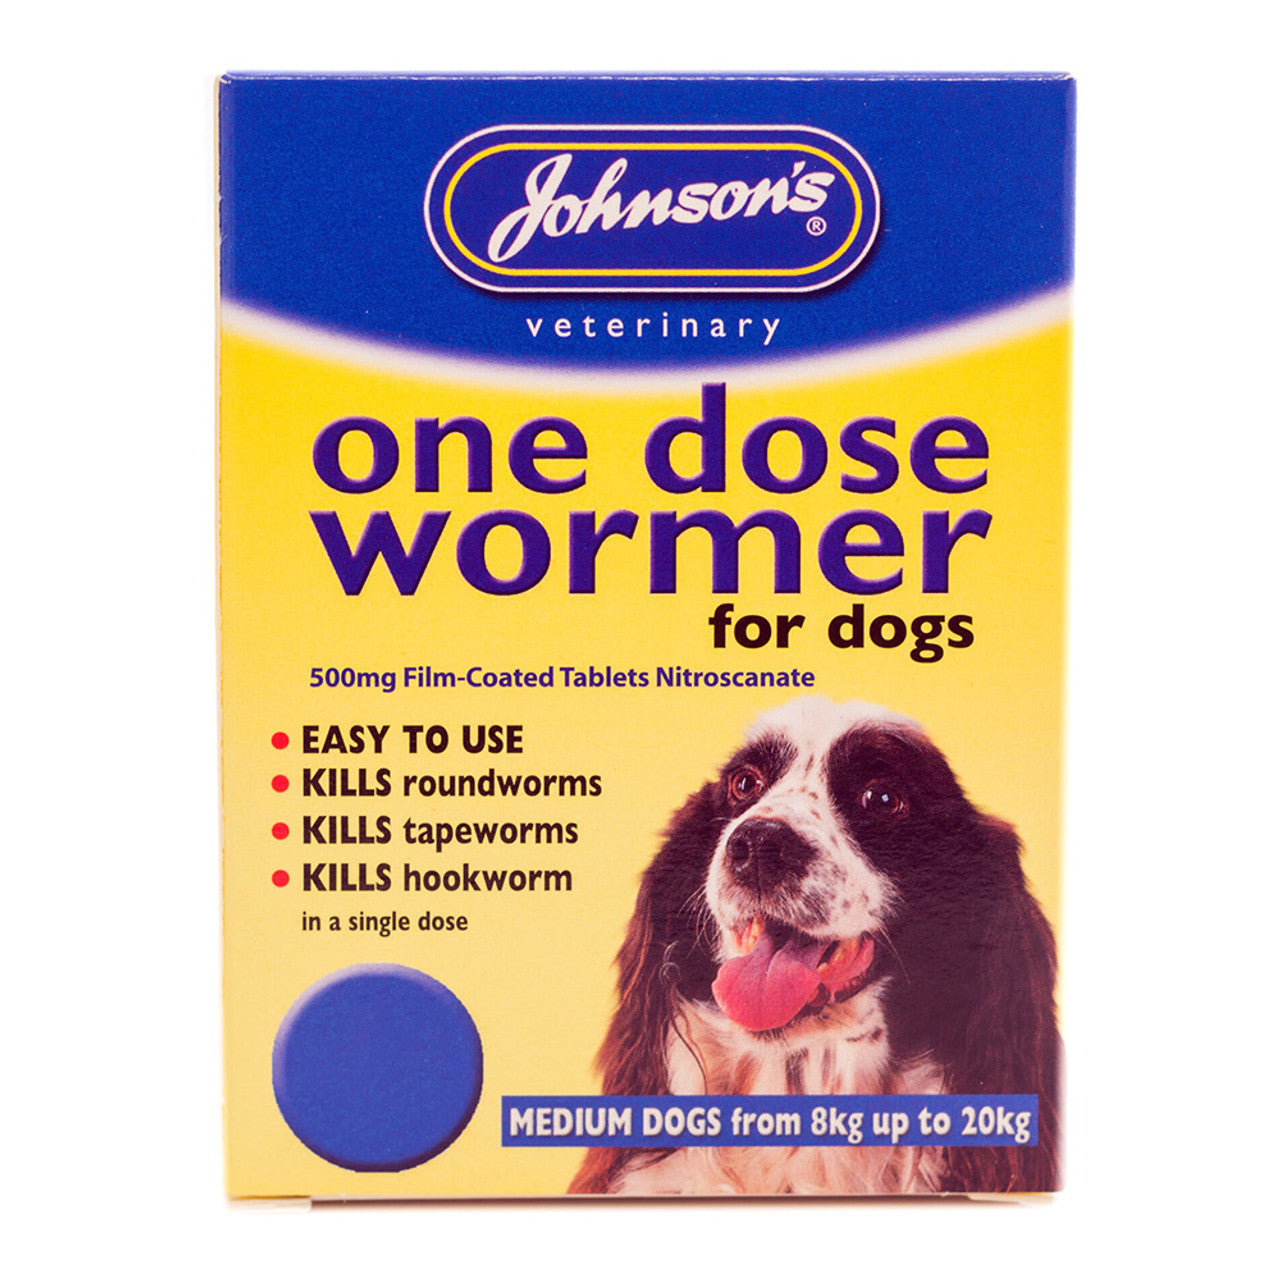 Johnsons One Dose Easy Wormer For Puppies & Dogs